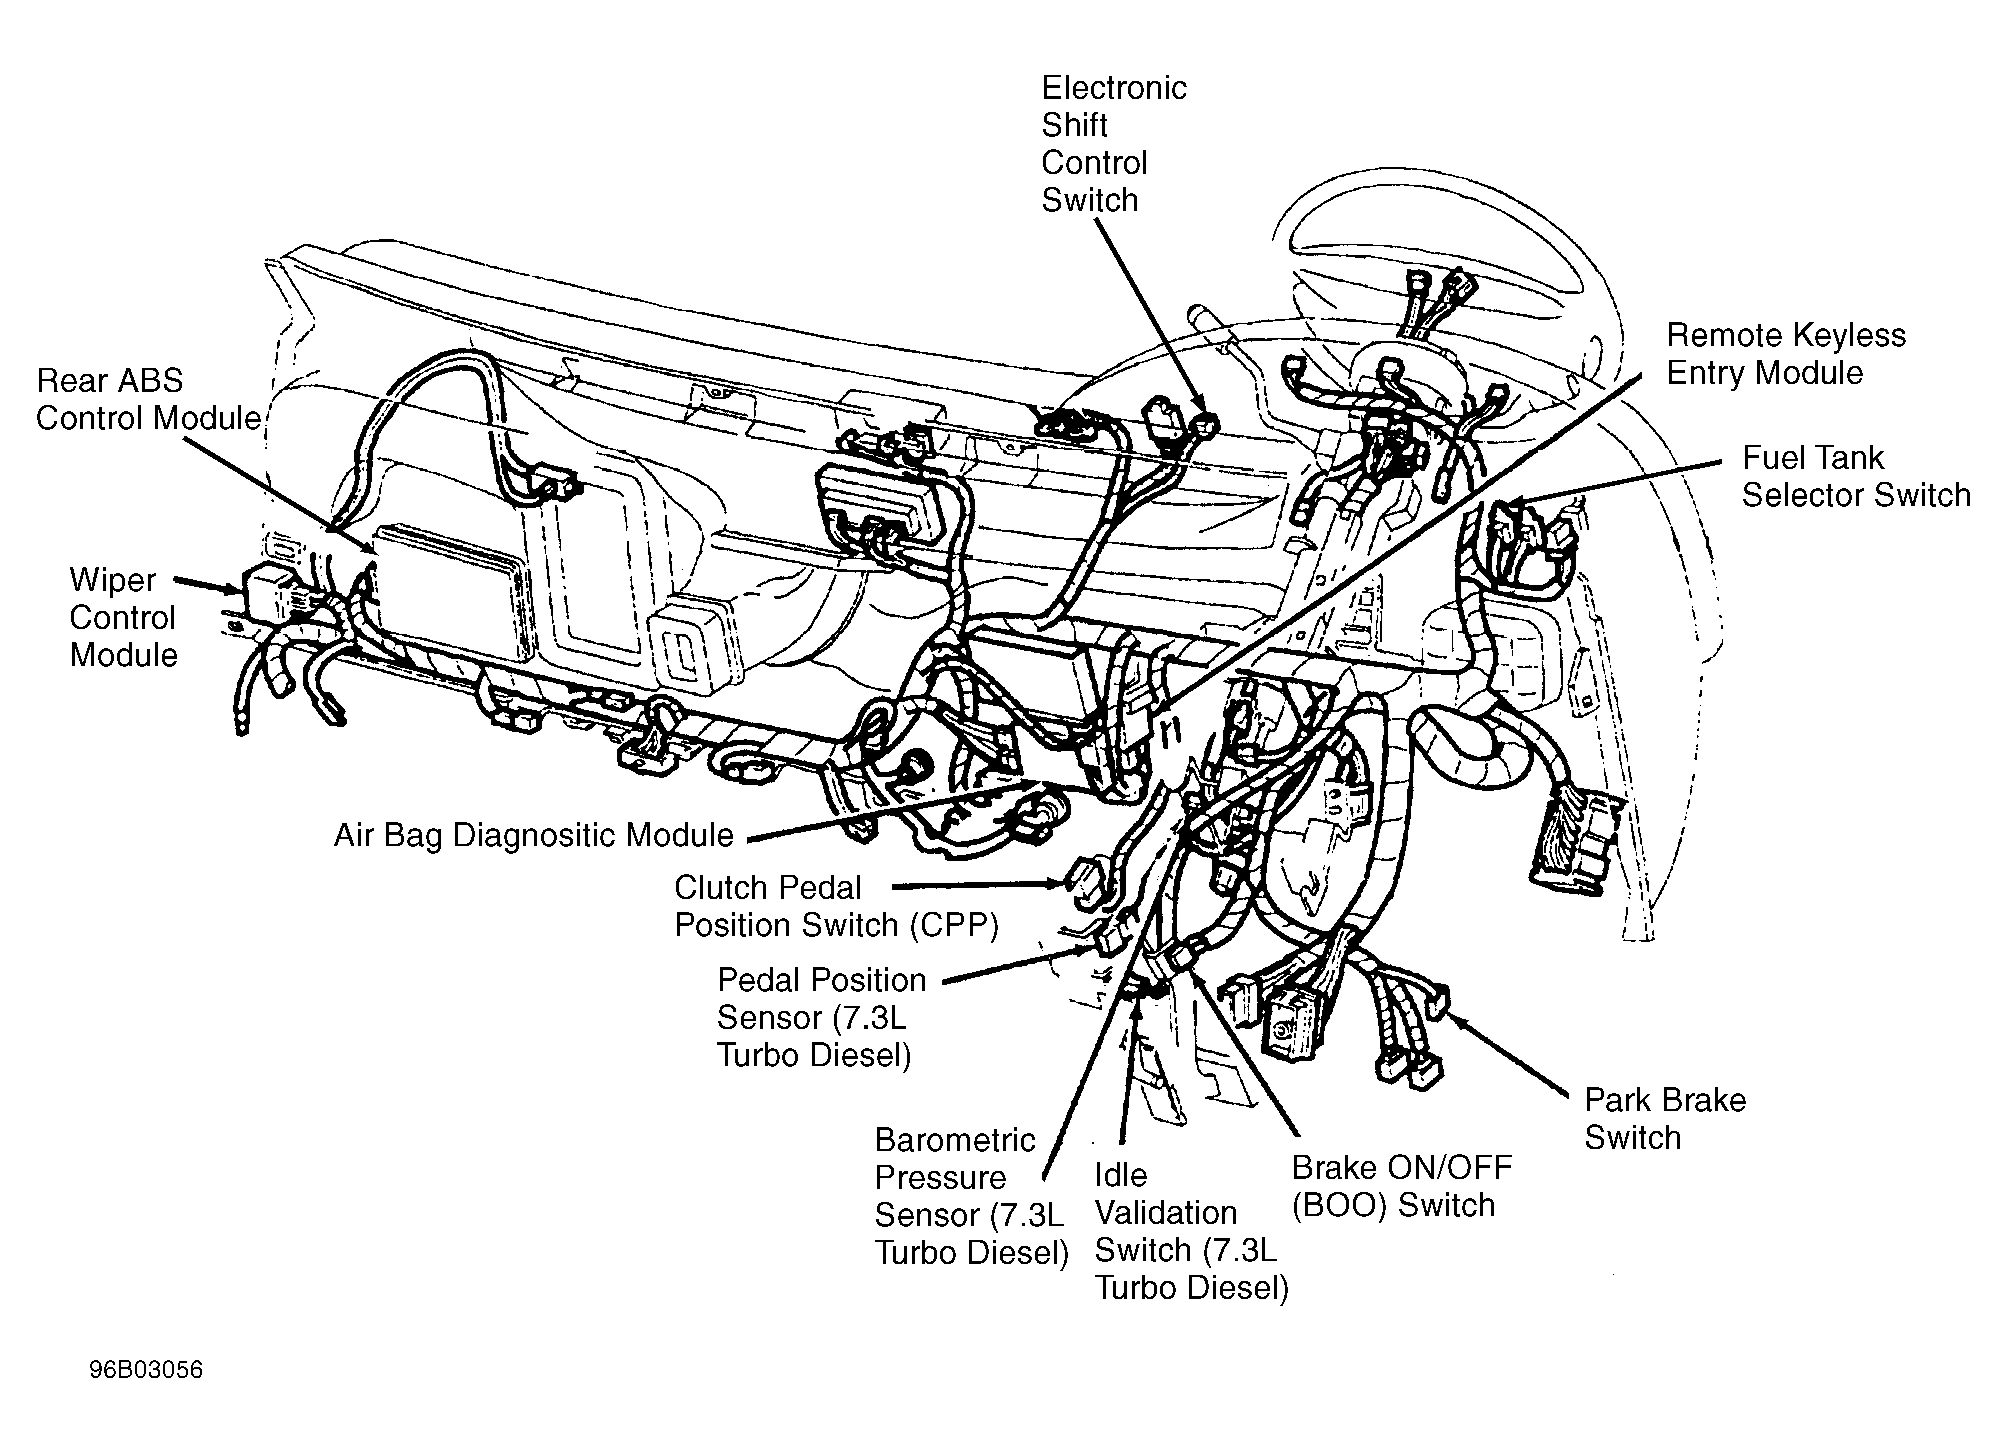 Ford Fuel Tank Selector Valve Wiring Diagram. 